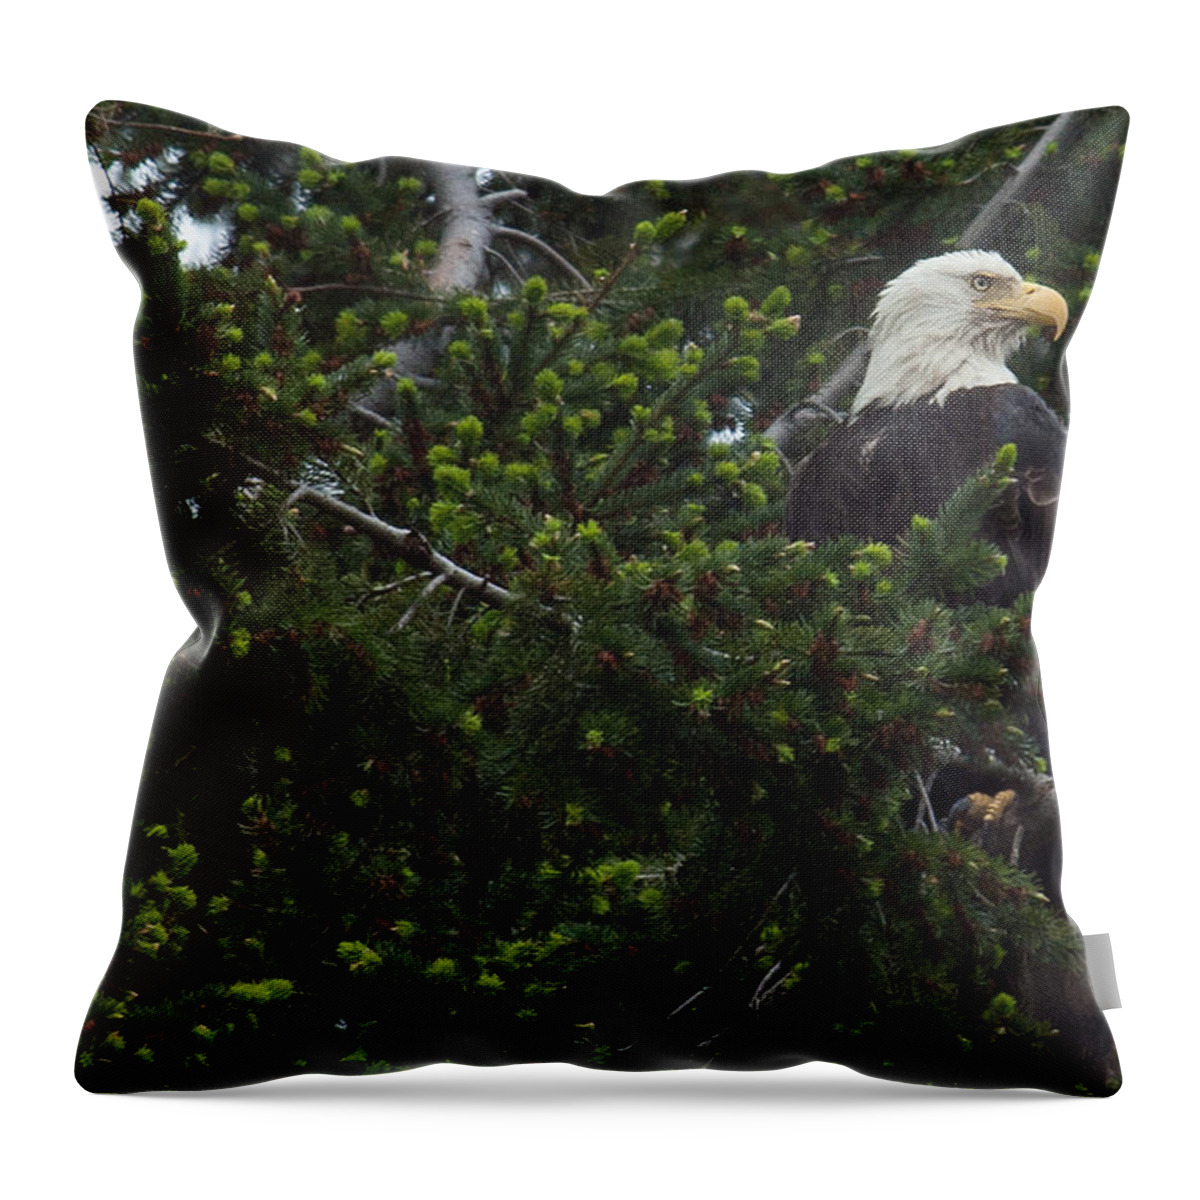 Bald Eagle Throw Pillow featuring the photograph Eagle Eye by Randy Hall